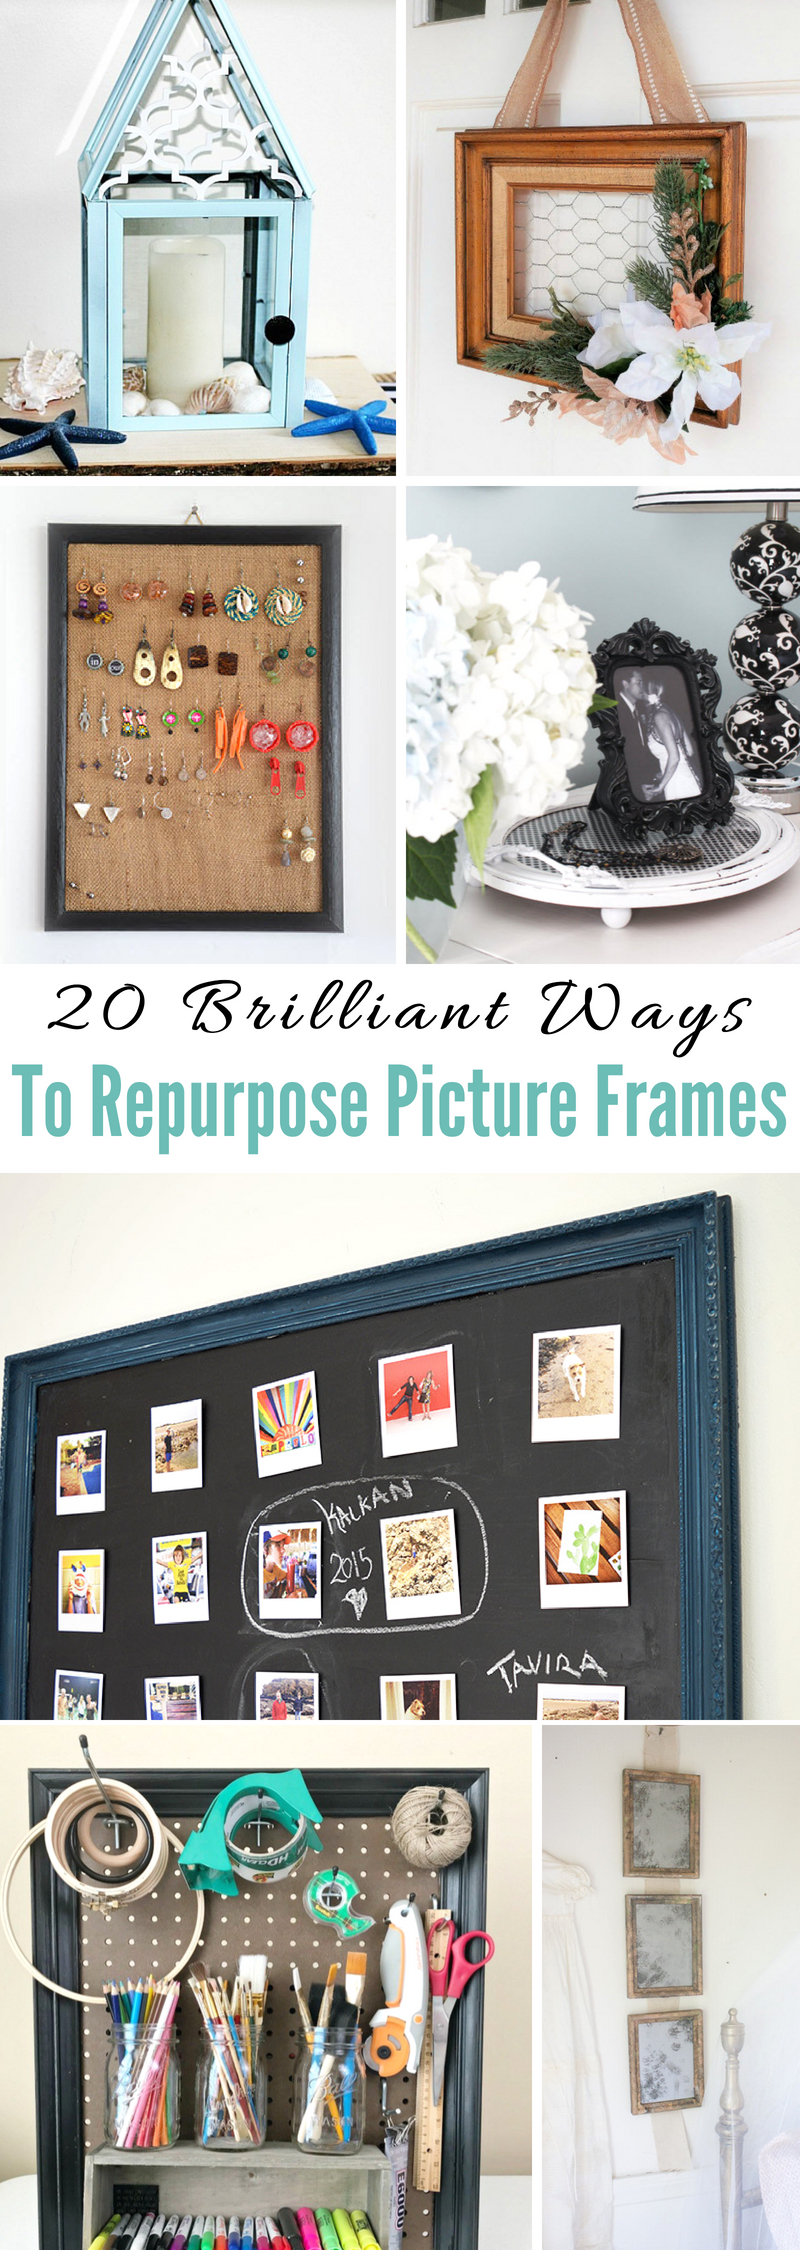 Ways To Repurpose Picture Frames 